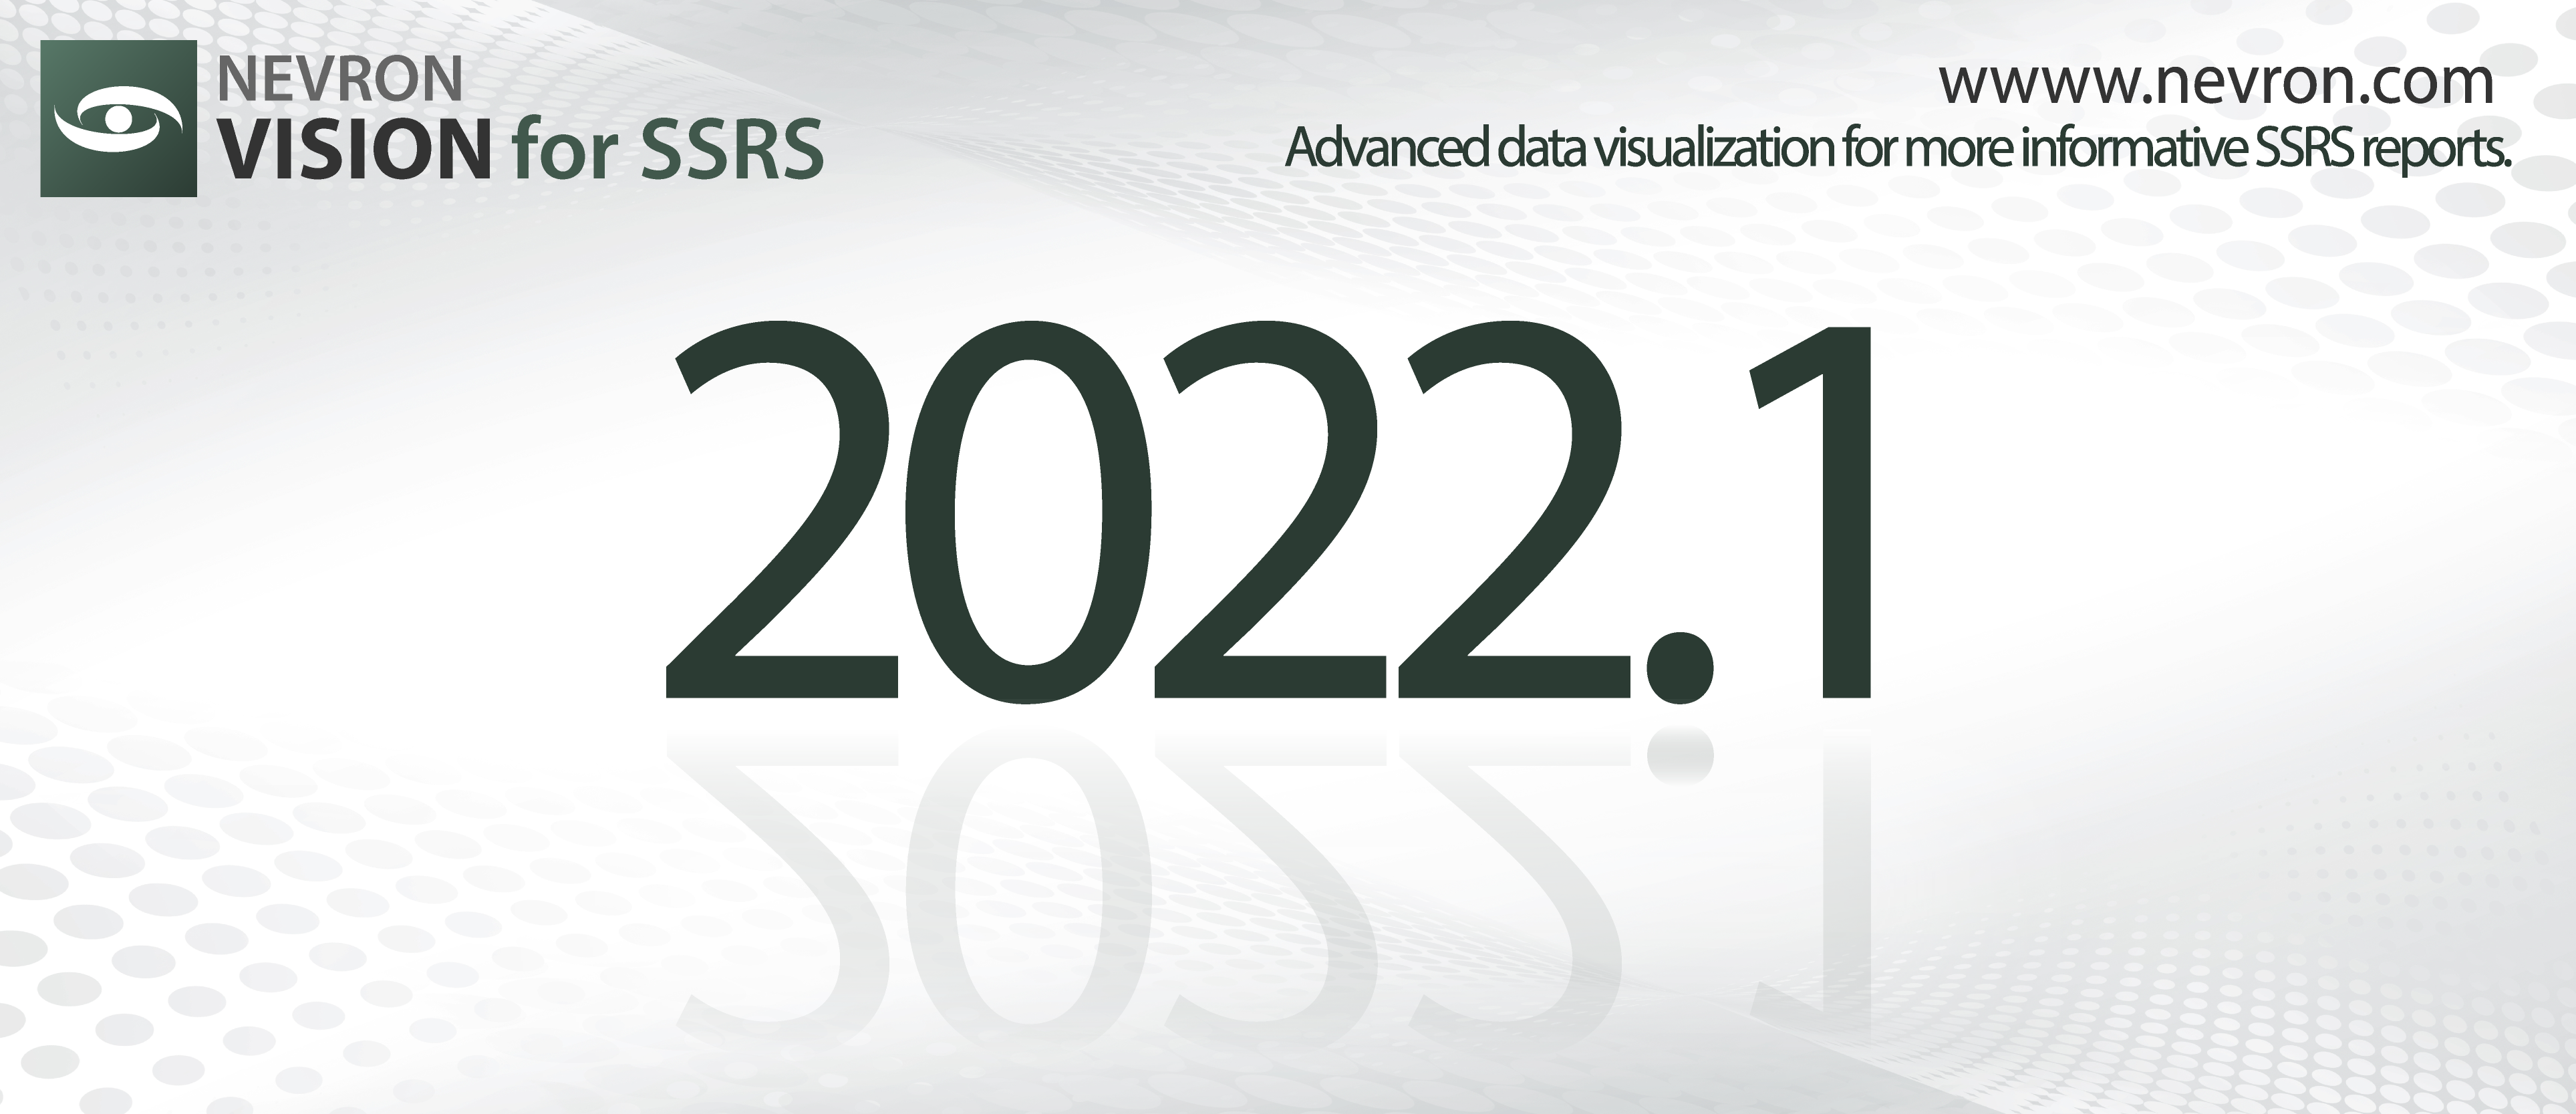 Nevron Software Announces the Official Release of Nevron Vision for SSRS 2022.1